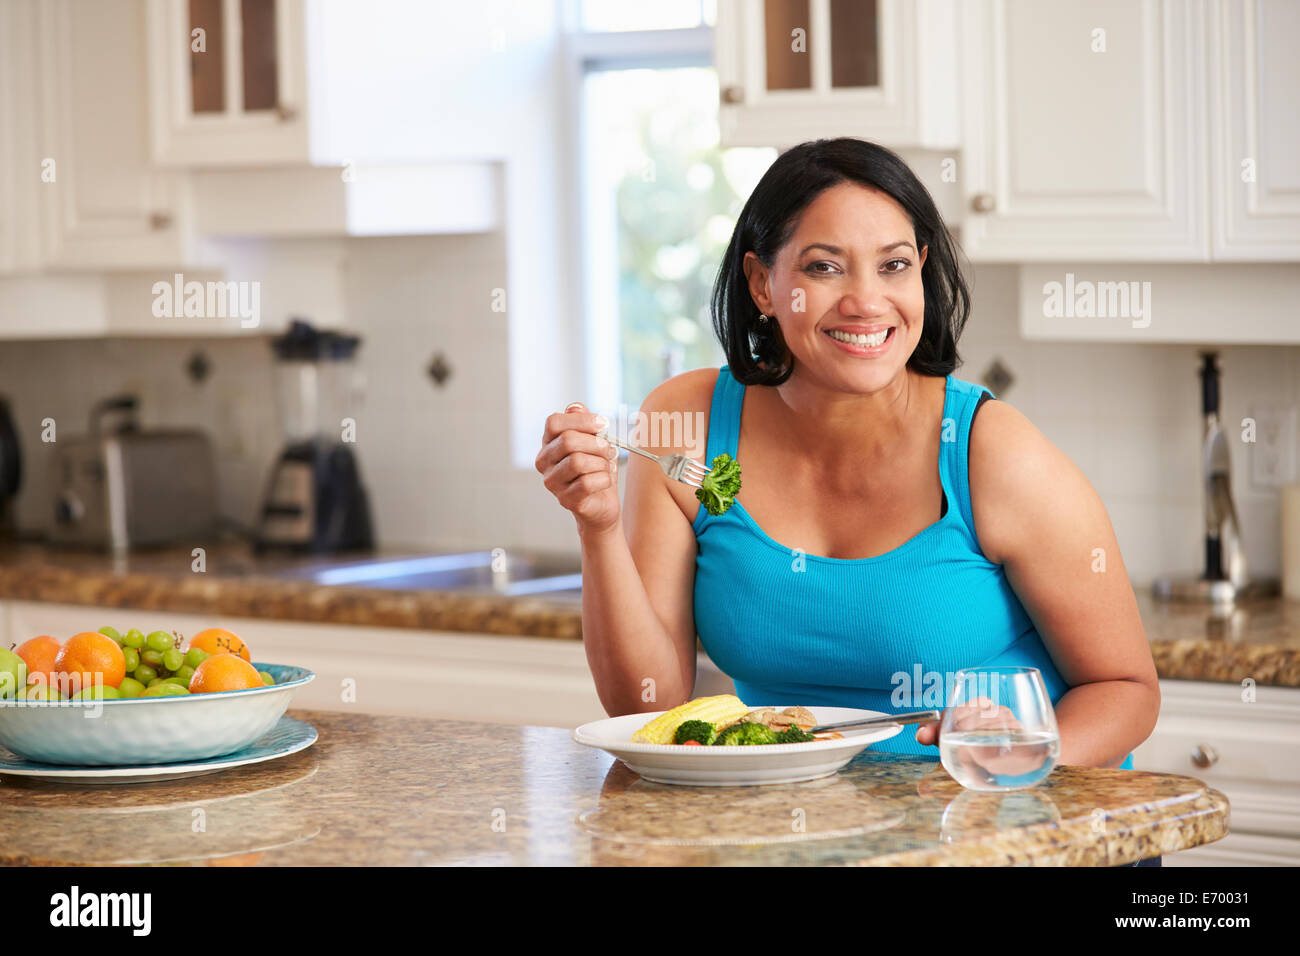 Overweight Woman Eating Healthy Meal in Kitchen Stock Photo